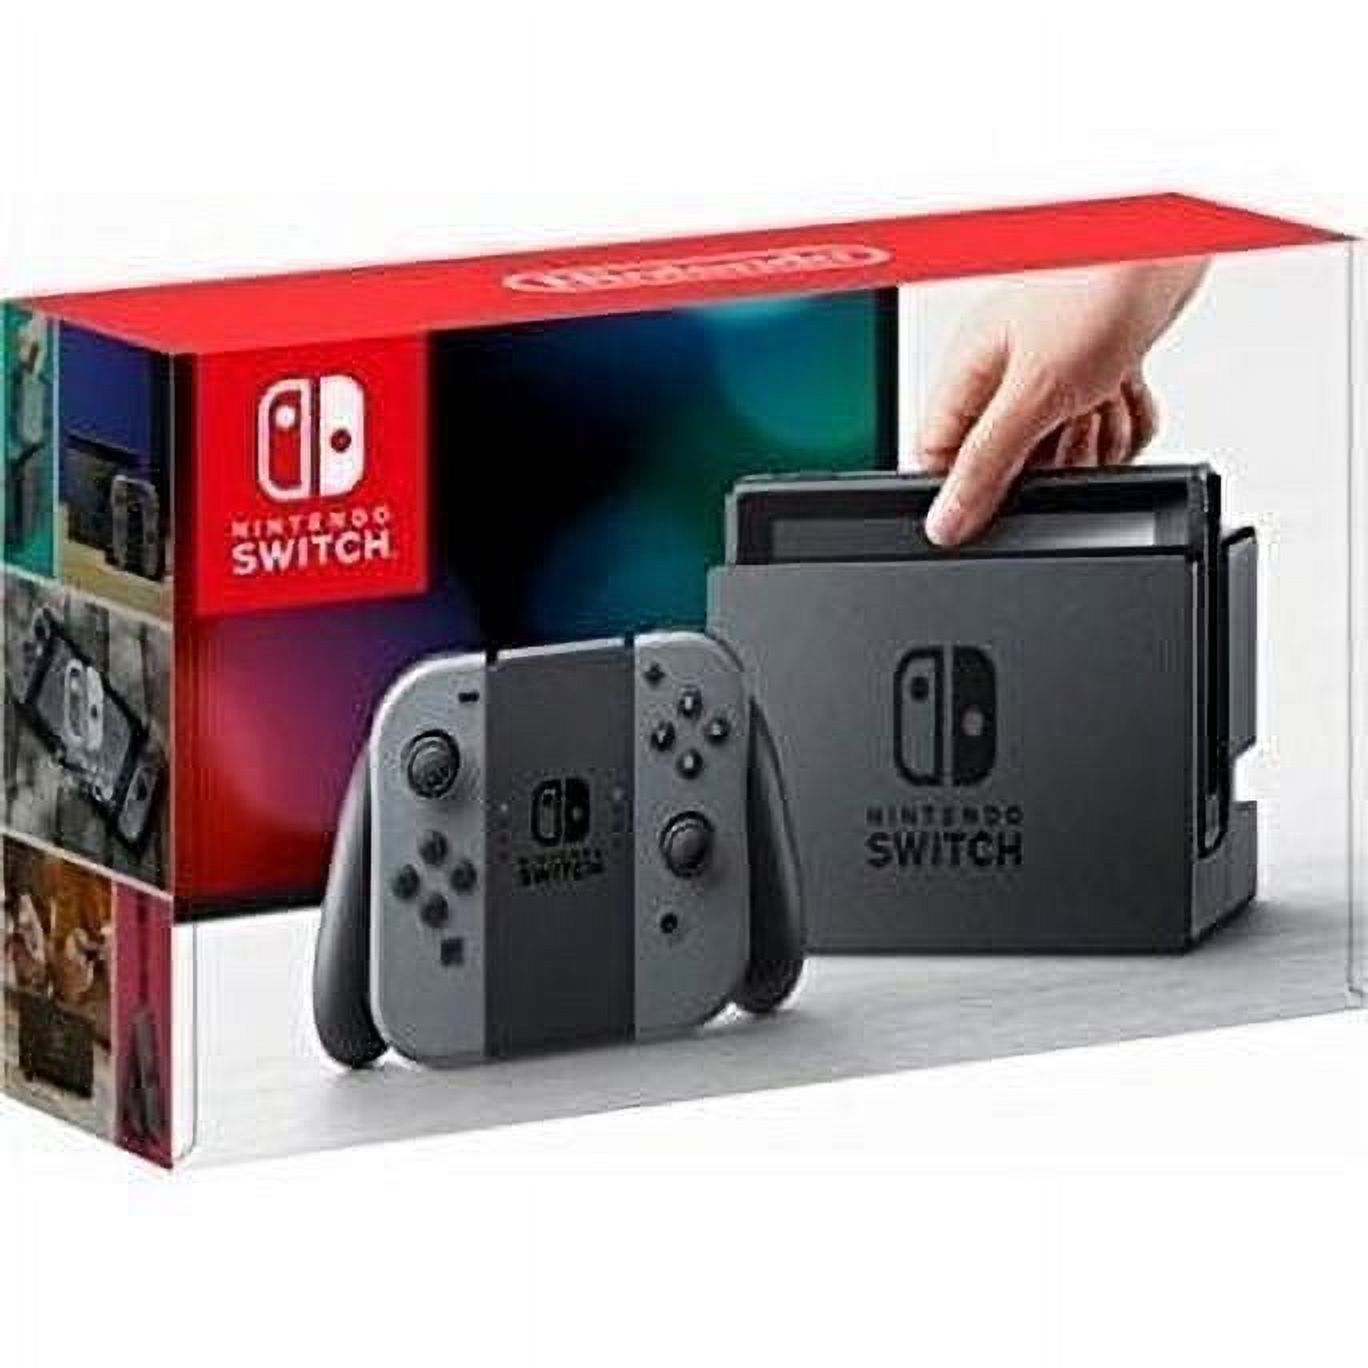 Nintendo Switch Console With Gray Joy-Con (2019) - image 2 of 5